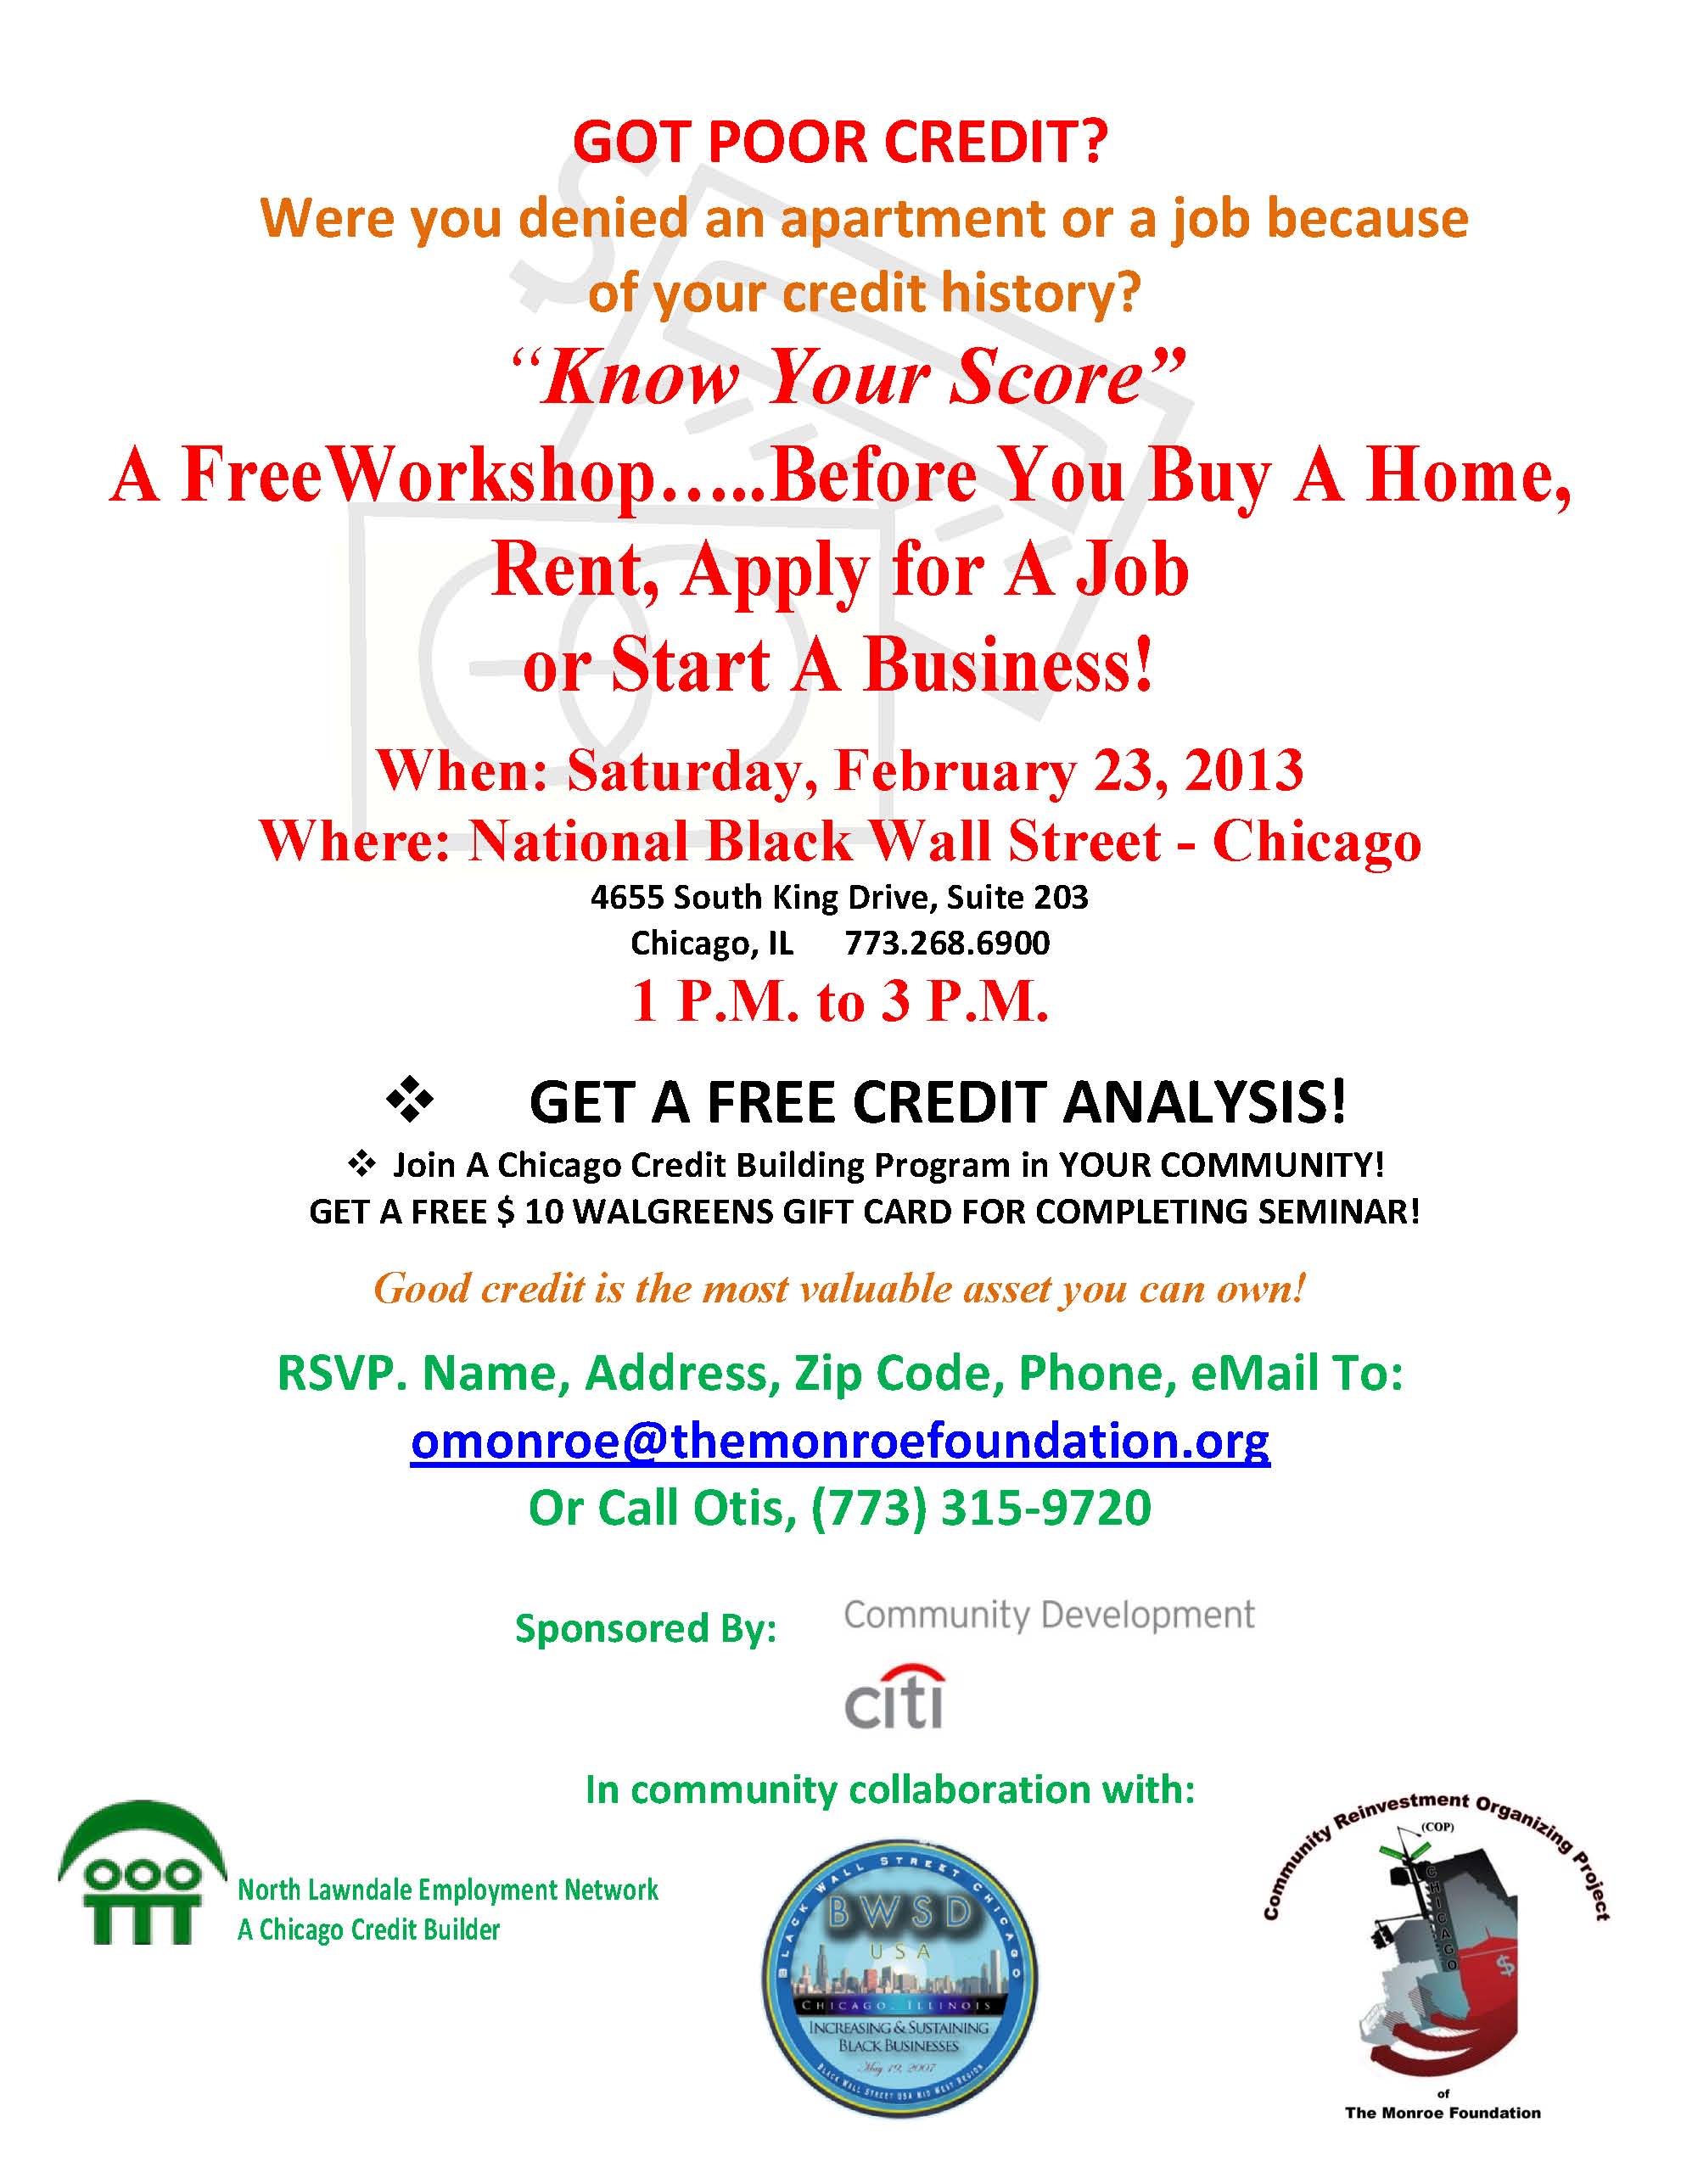 Know Your Credit Workshop